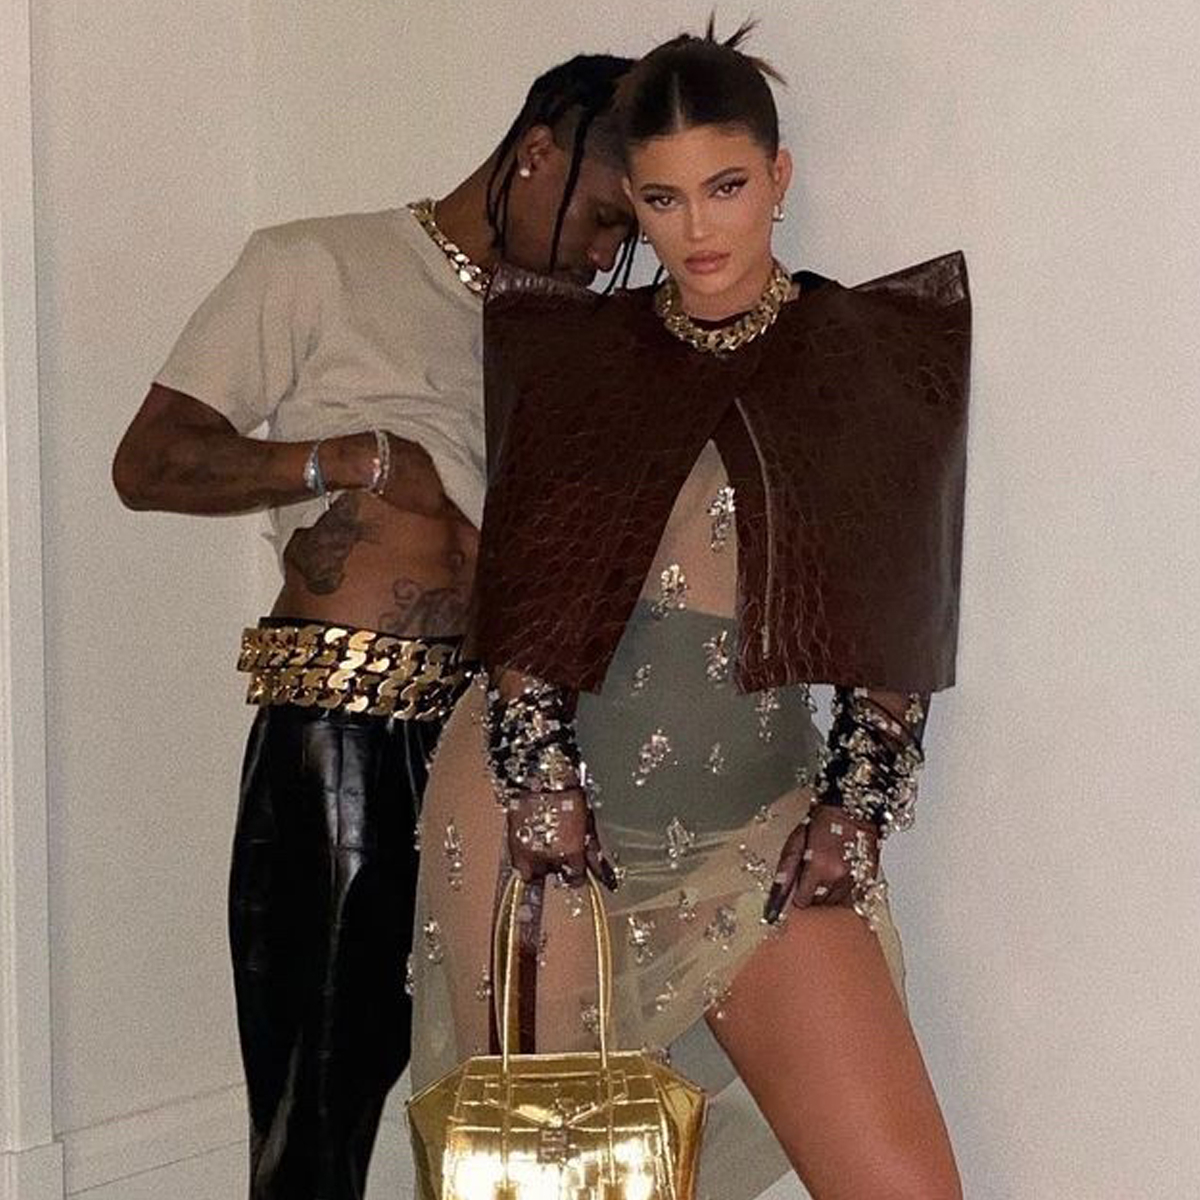 Keeping Up with Kylie: Check Out the Bags Kylie Jenner's Been